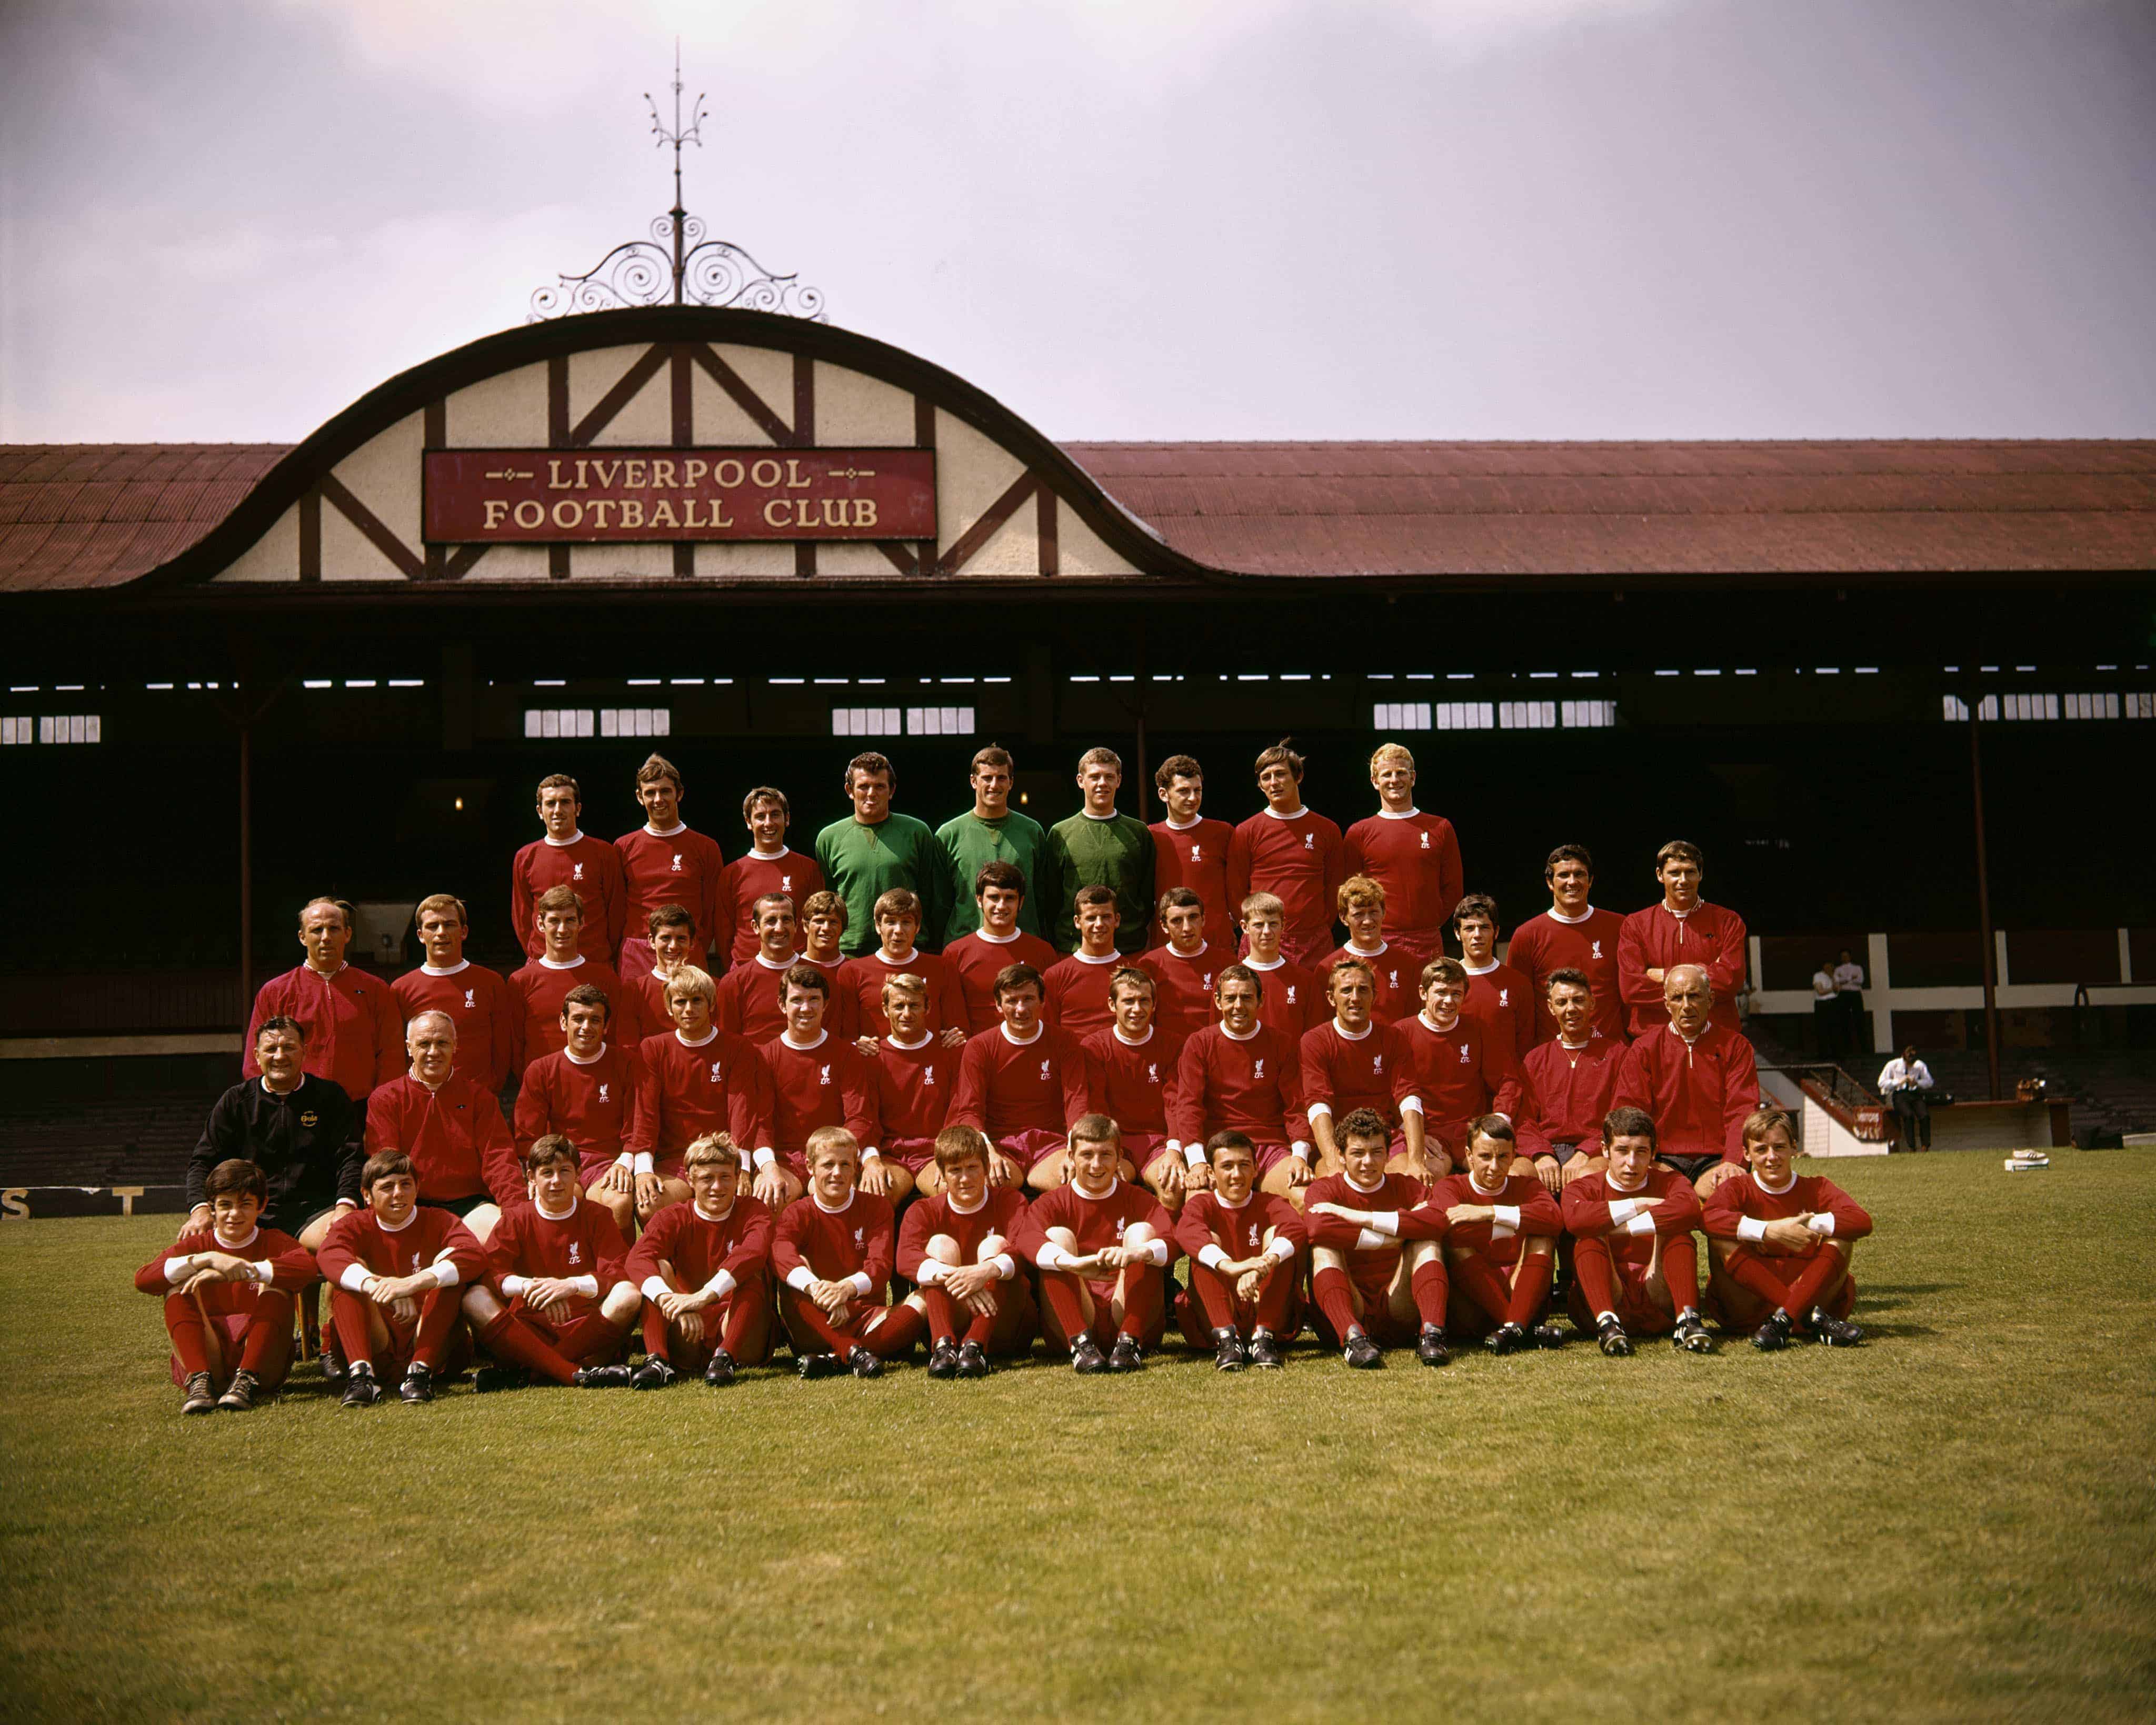 Liverpool squad 1969-70: (back row, l-r) Geoff Strong, Gerry Byrne, Chris Lawler, Tommy Lawrence, Ray Clemence, Larry Lloyd, Ian Ross, Alec Lindsay; (front row, l-r) Ian Callaghan, Alun Evans, Roger Hunt, Tommy Smith, Ron Yeats, Emlyn Hughes, Ian St John, Peter Thompson, Bobby Graham (Picture by PA Photos PA Archive/PA Images)